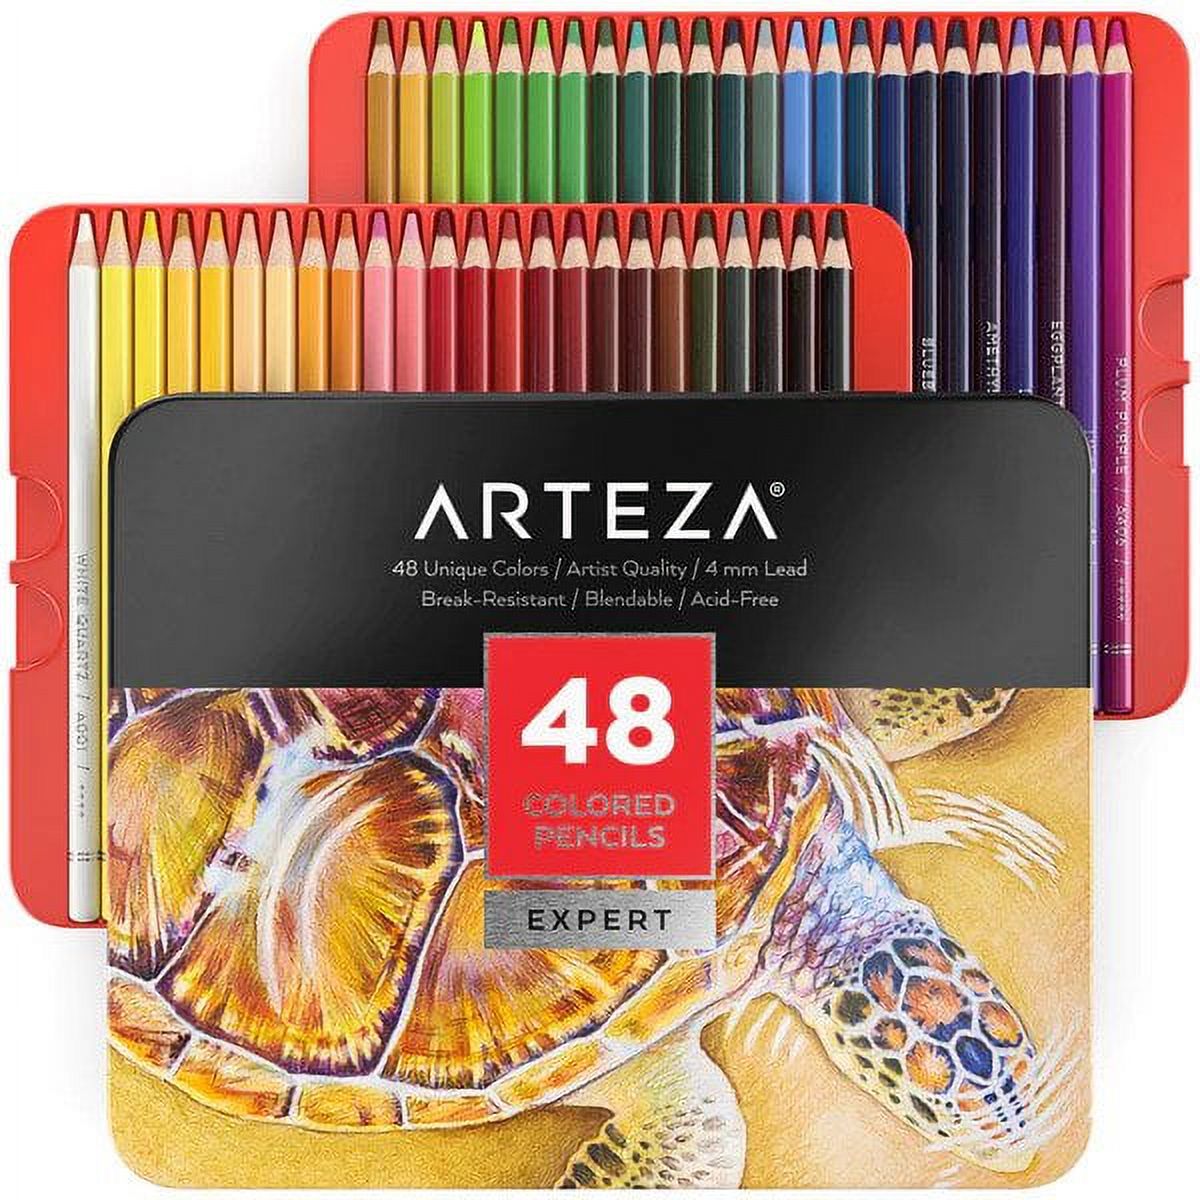 Arteza Professional Colored Pencils, High Pigment Assorted Colors, Set for Adult Artists - 48 Pack - image 1 of 7